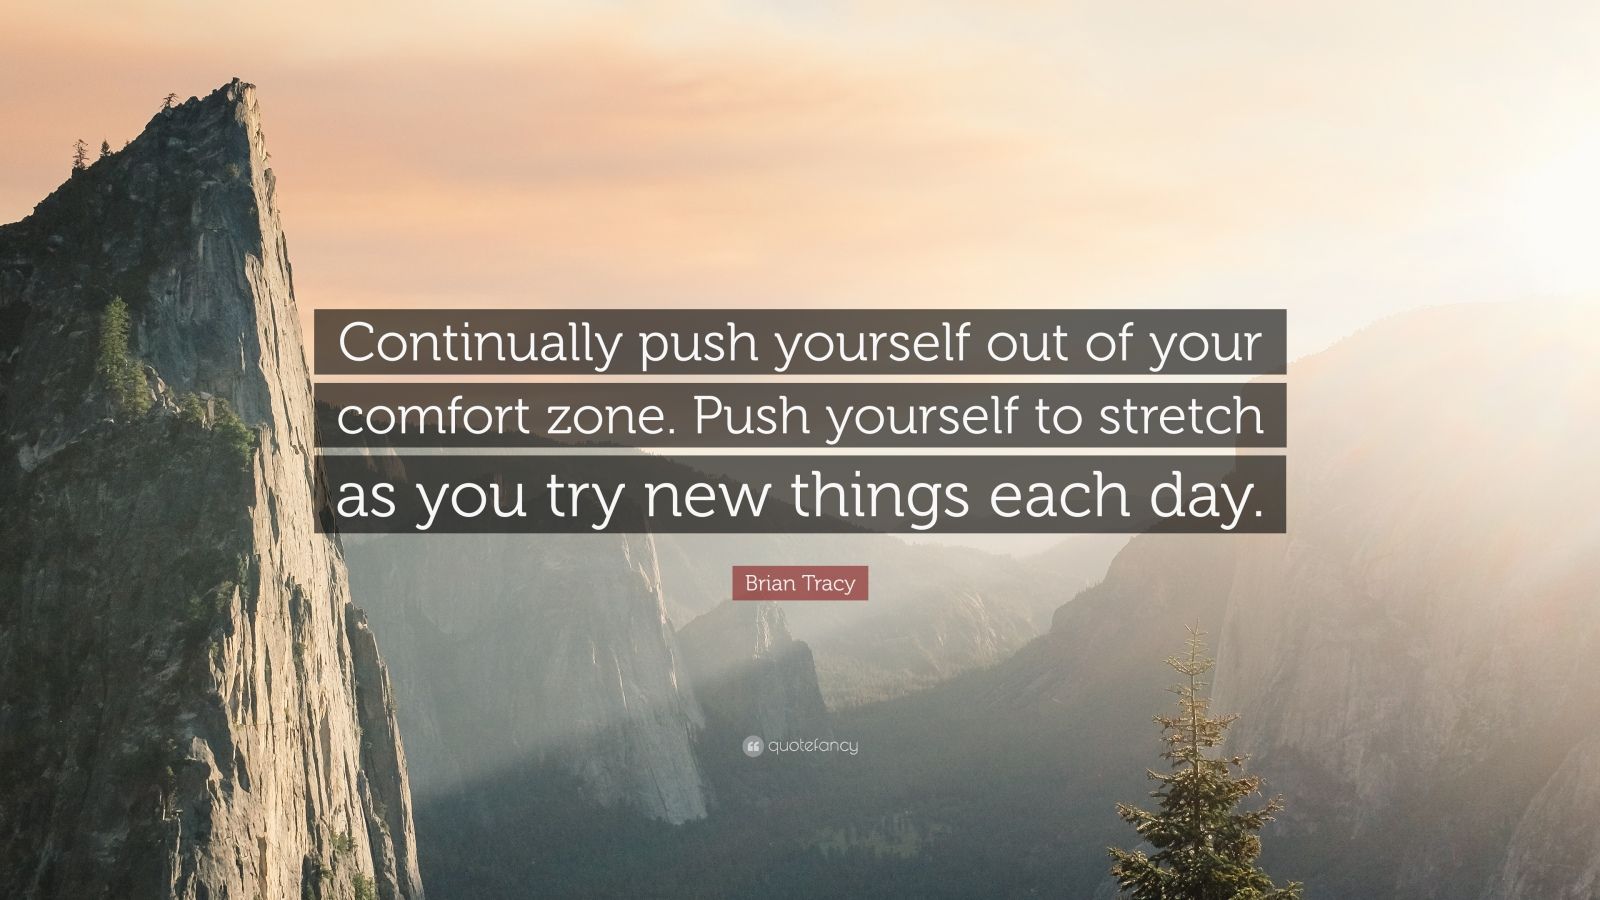 Why is it important to push yourself out your comfort zone